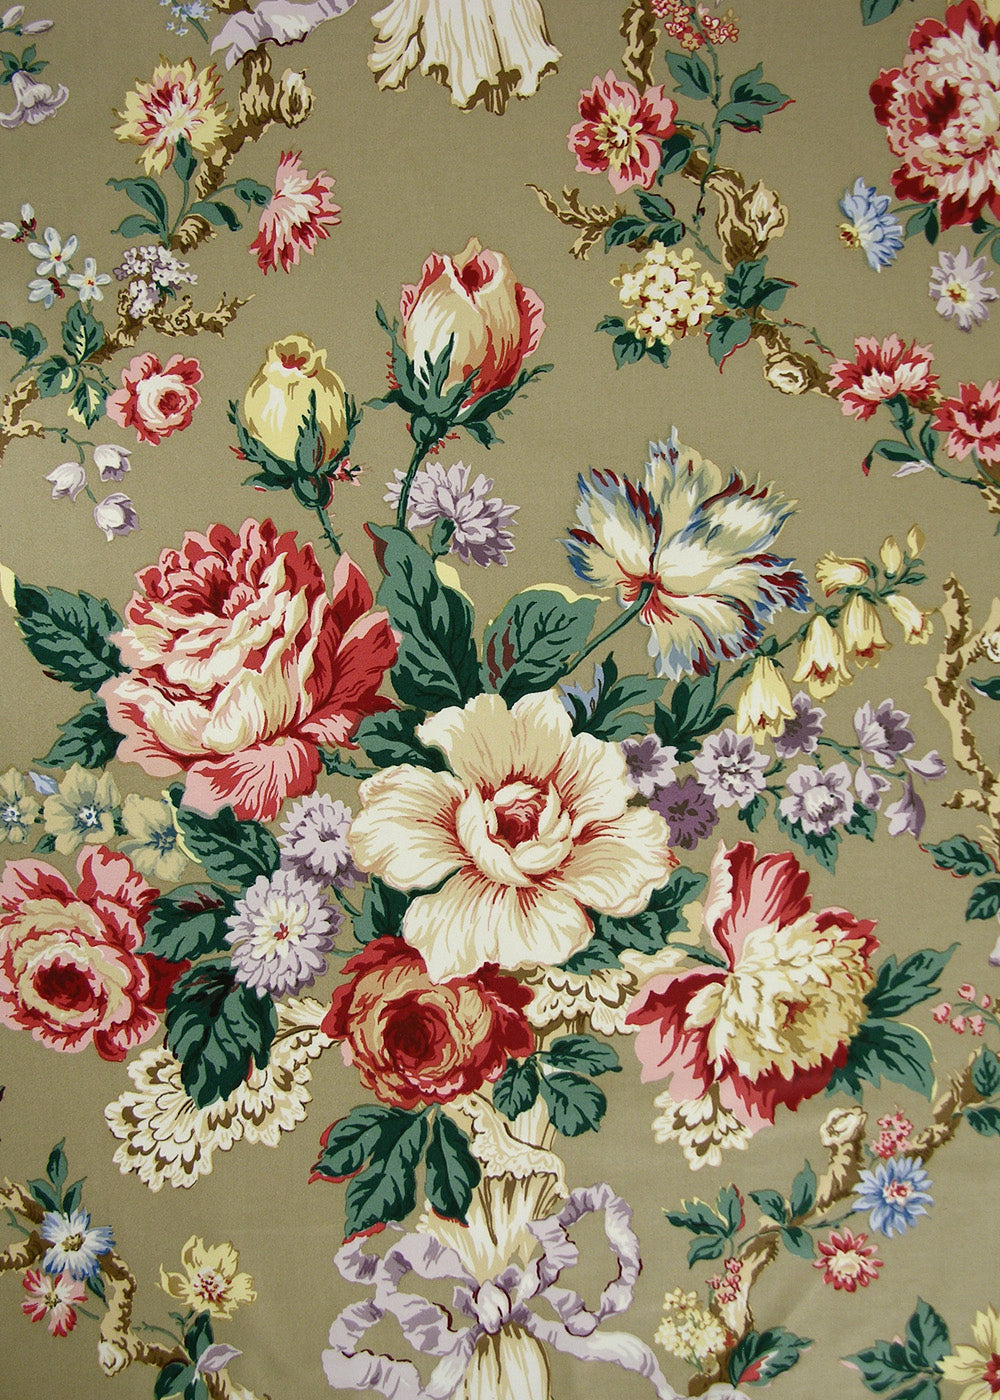 chintz fabric printed with roses, ribbons, and floral vines on a dark taupe background